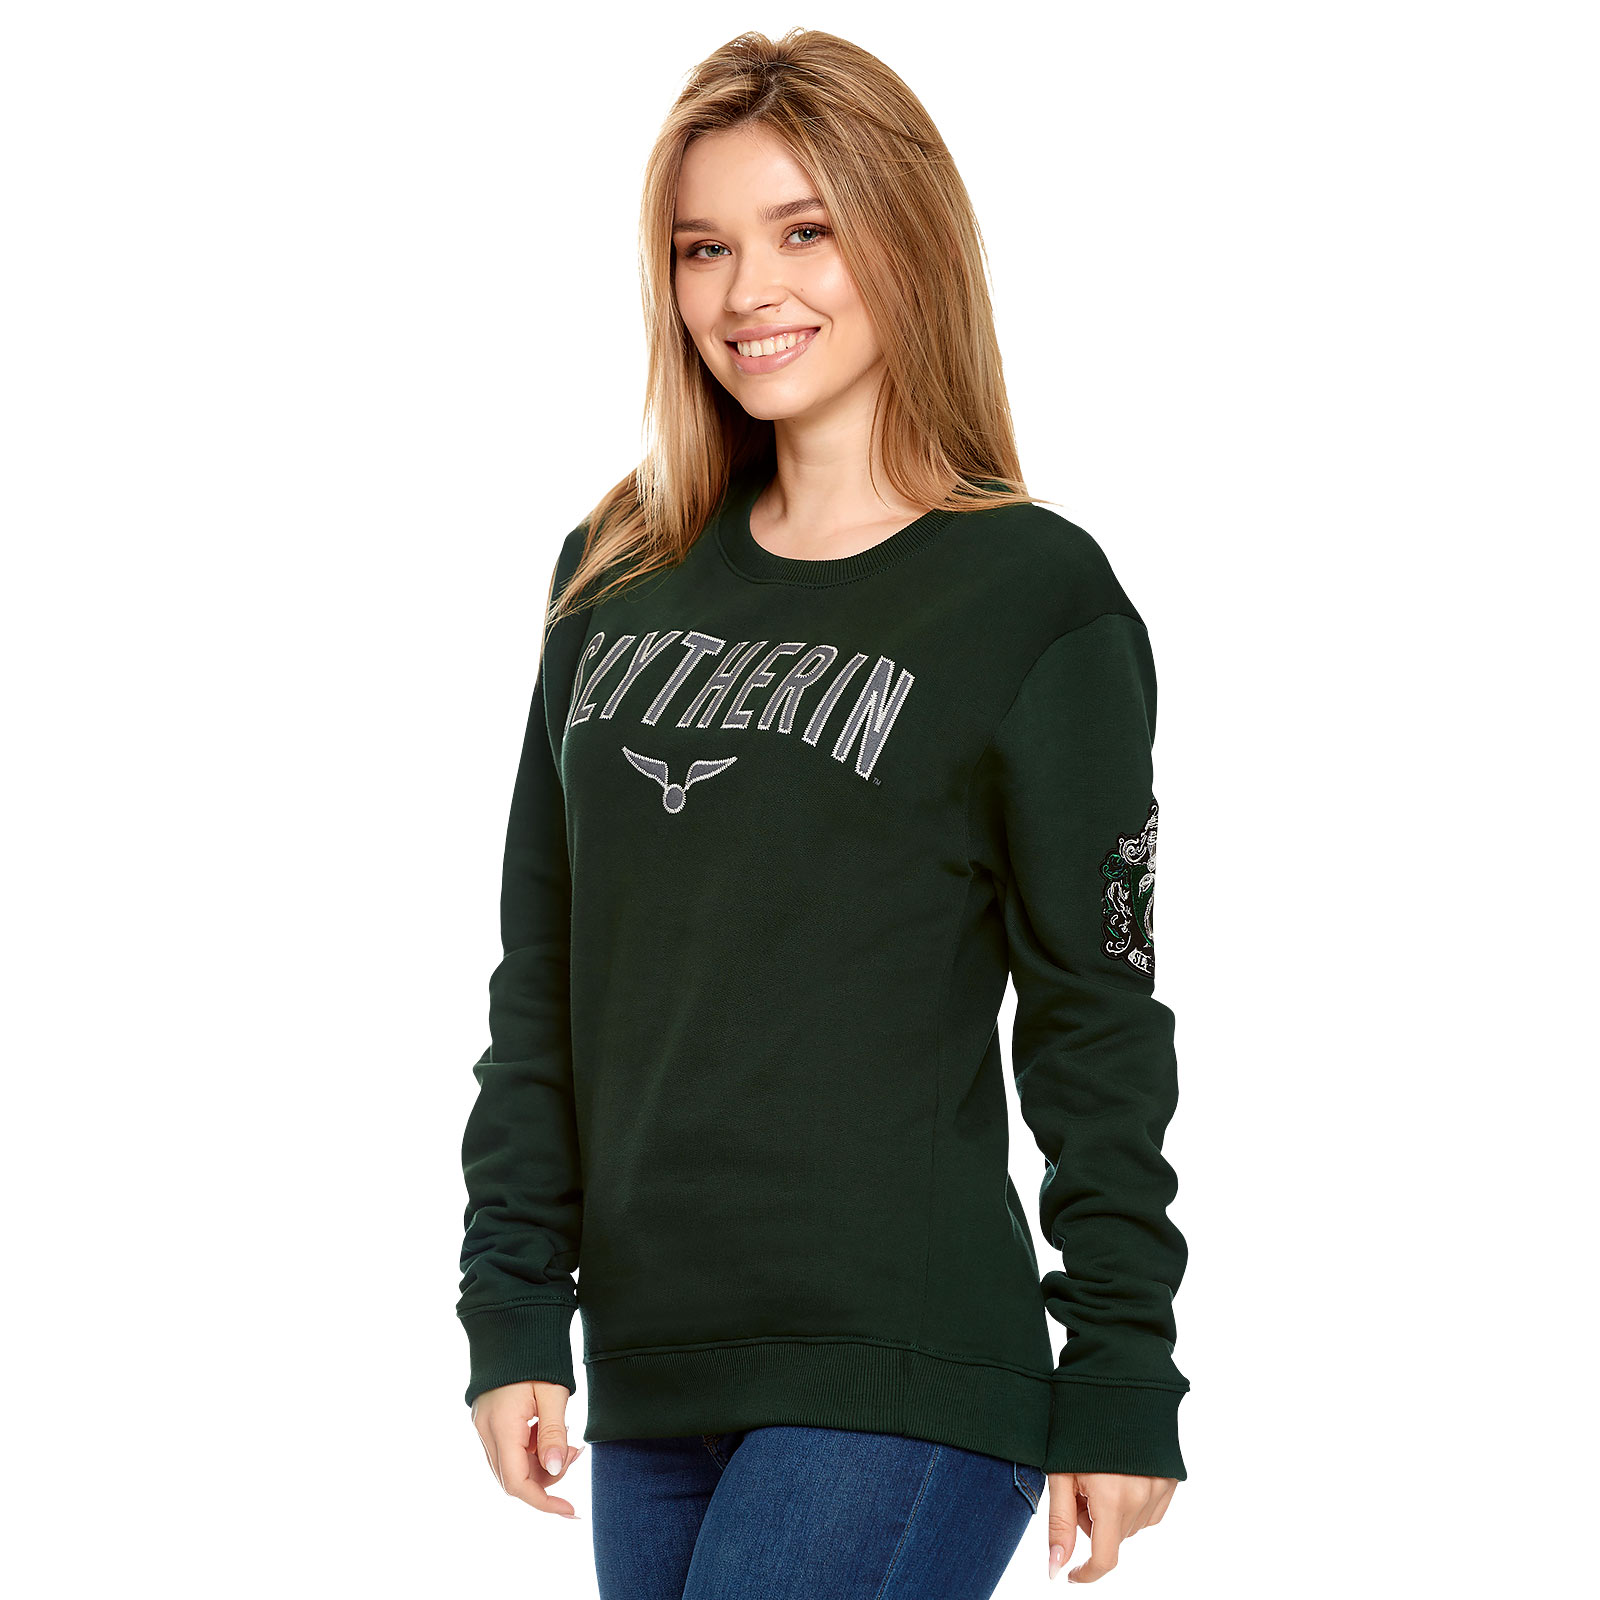 Harry Potter - Team Slytherin Sweater green